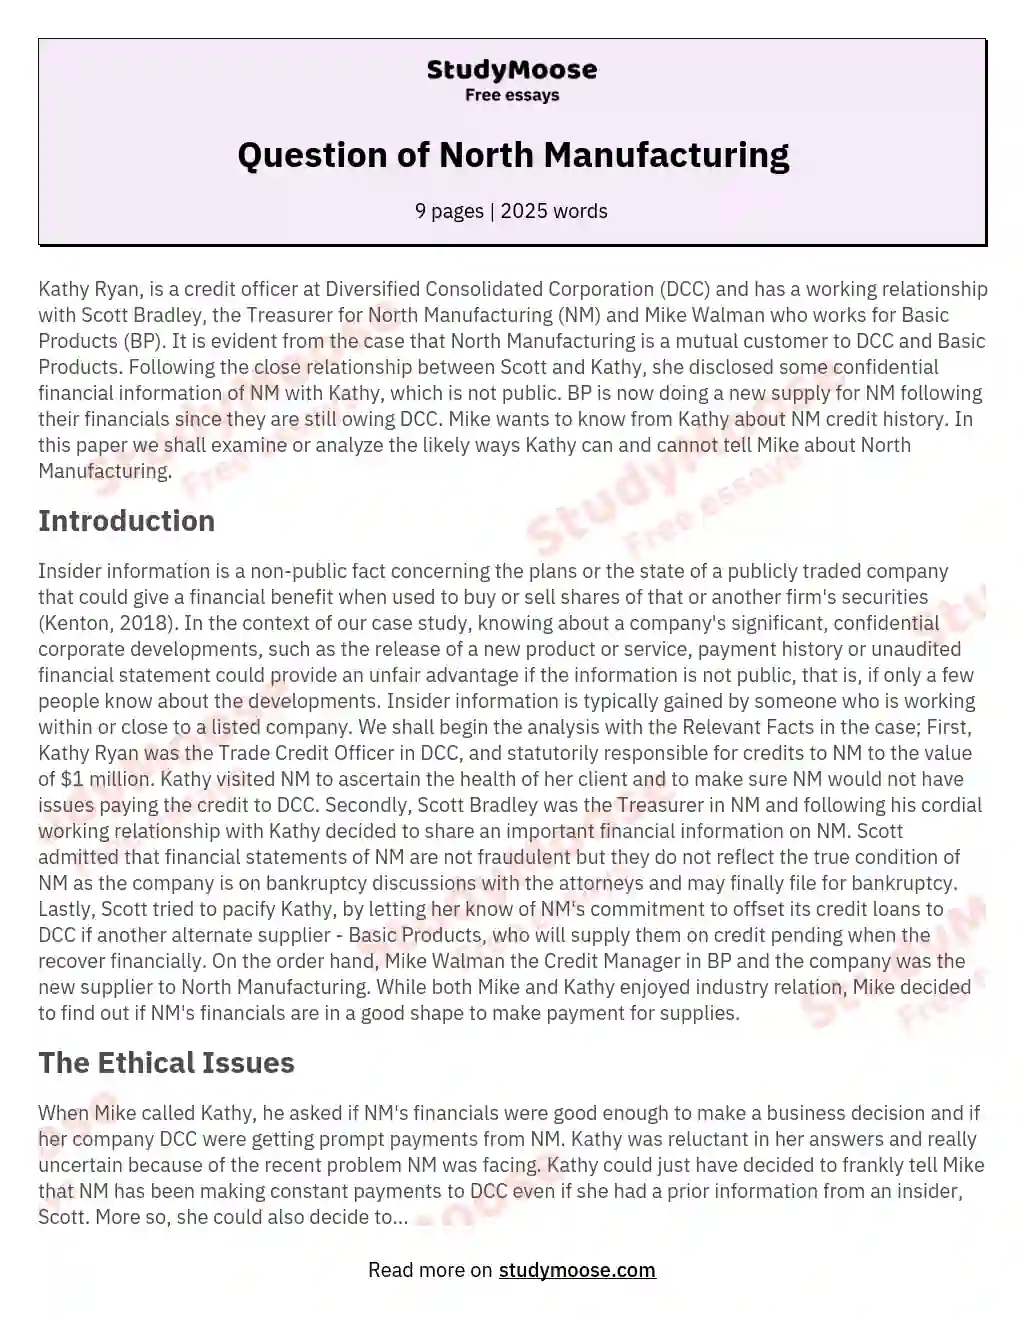 Question of North Manufacturing essay